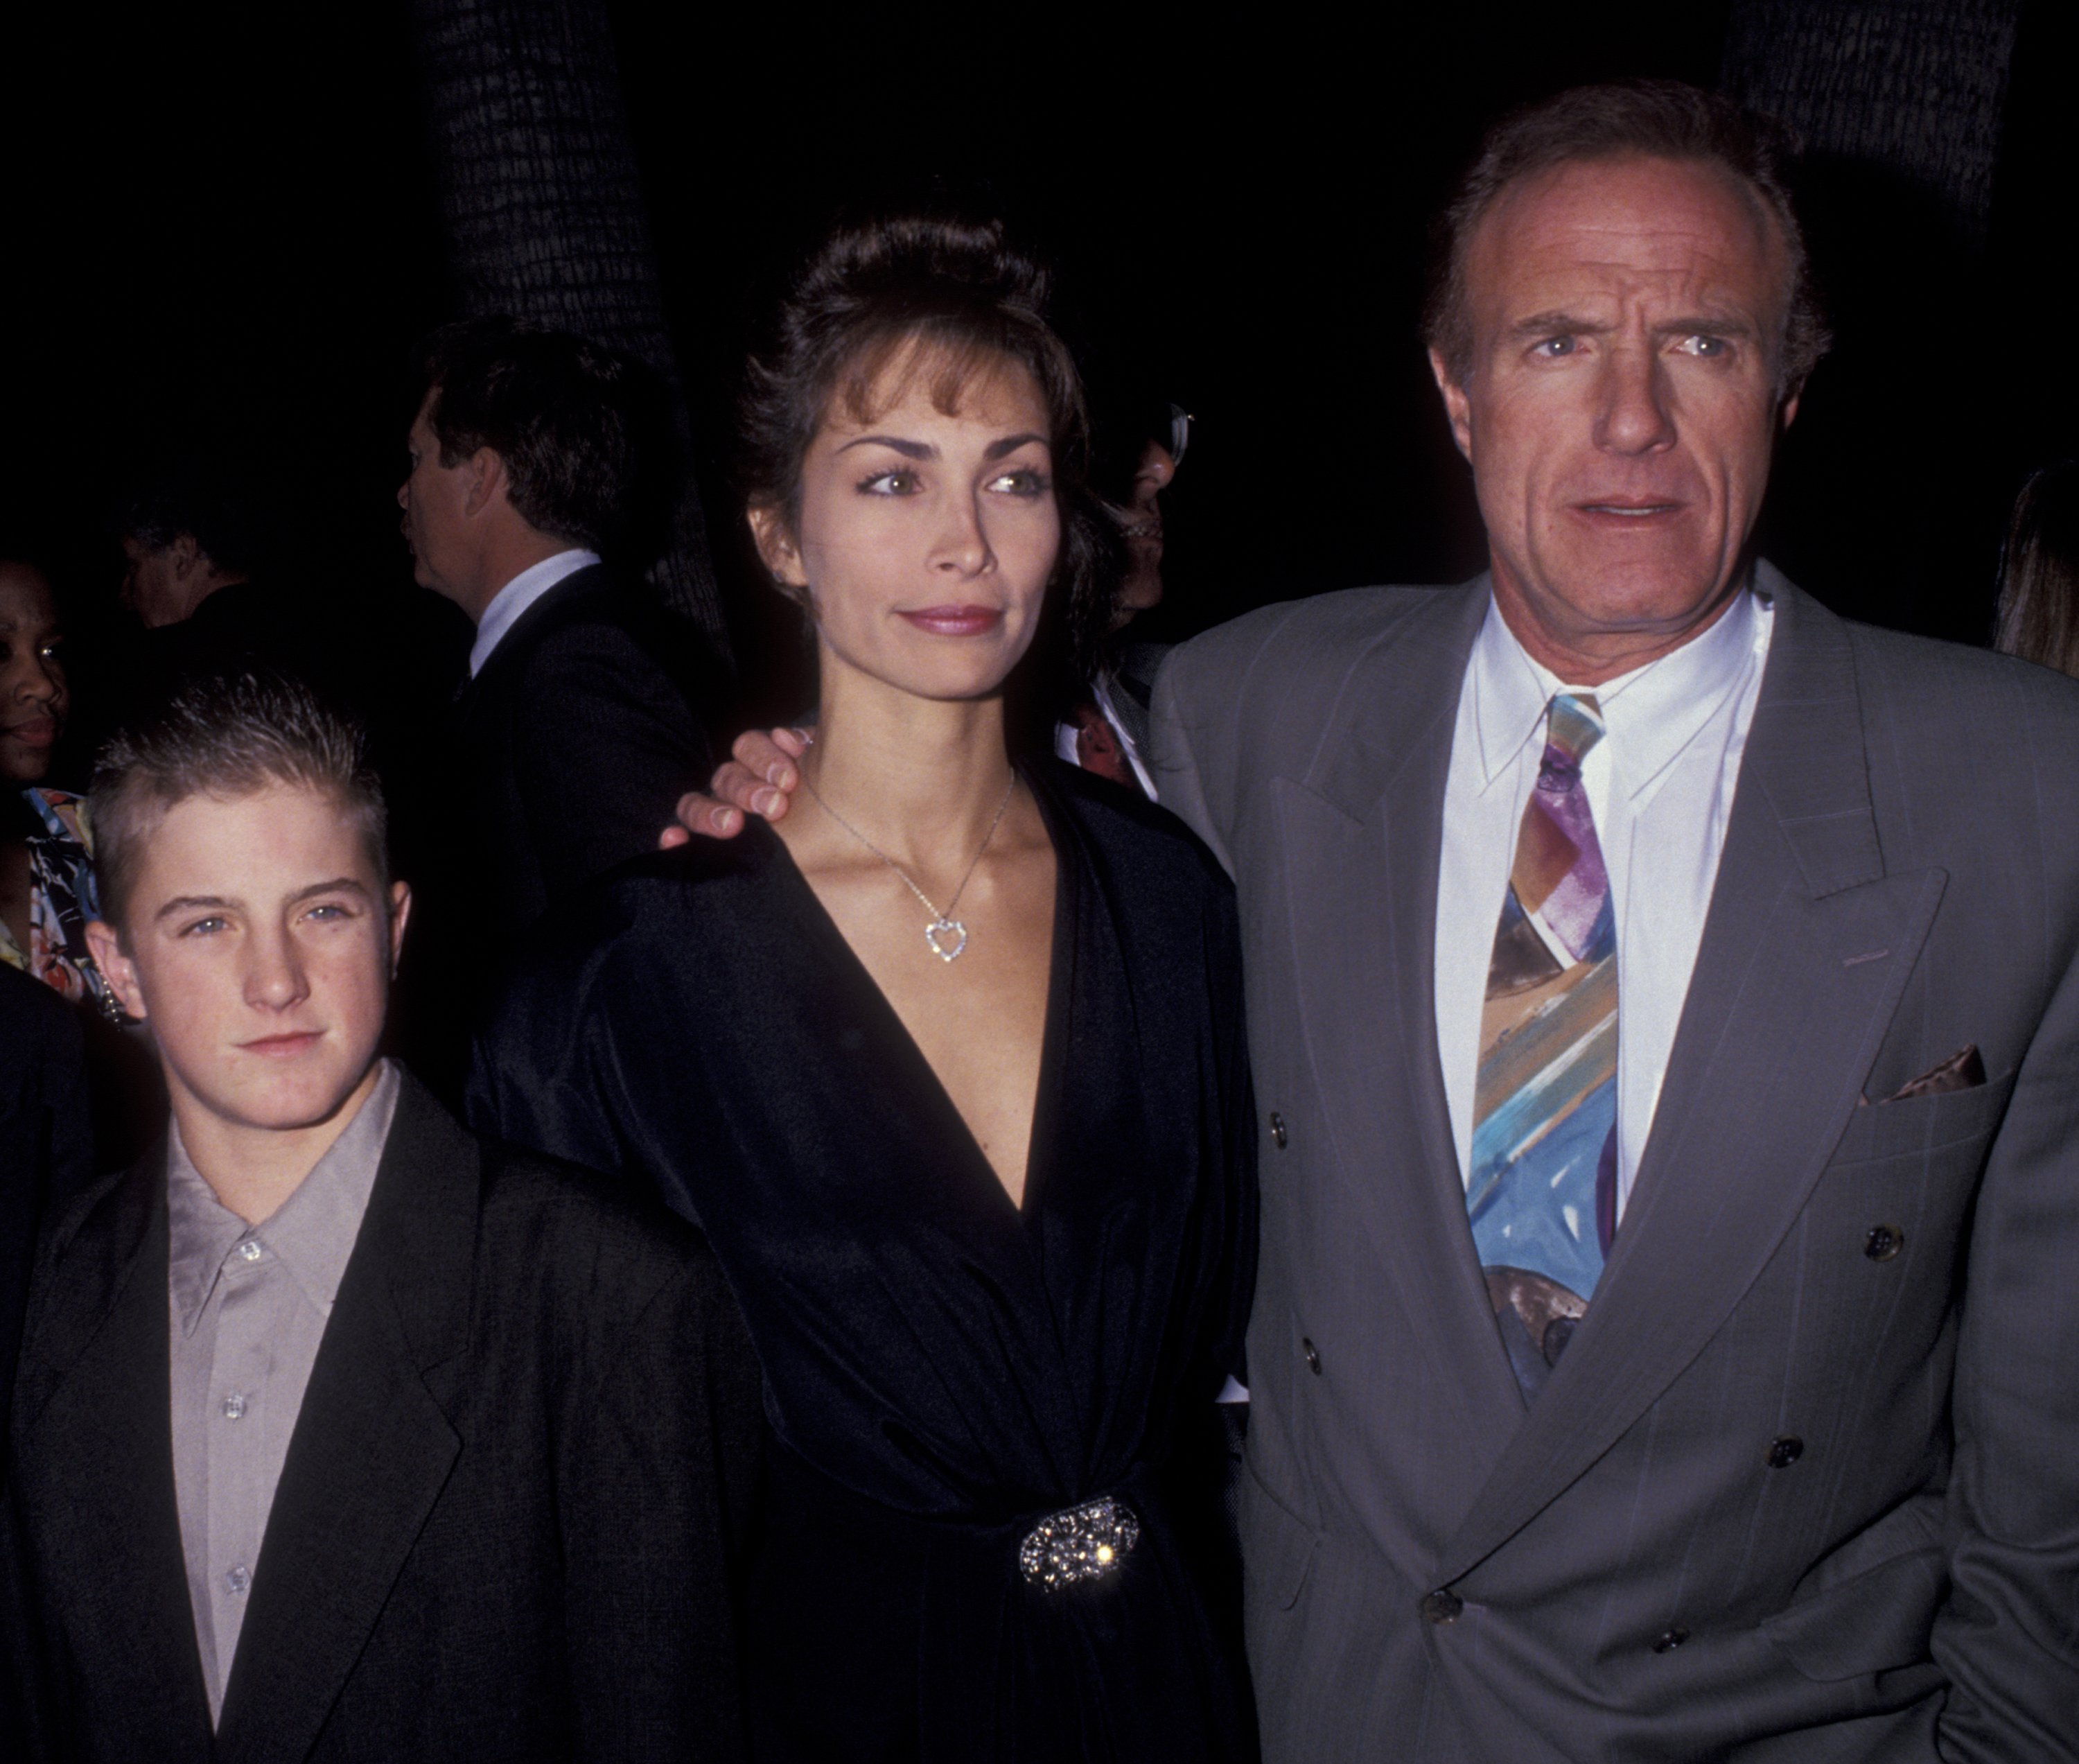 James Caan photographed with his wife Ingrid Hajek and his son Scott Caan during the premiere of "For The Boys" on November 14, 1991 at the Academy Theater in Beverly Hills, California. / Source: Getty Images